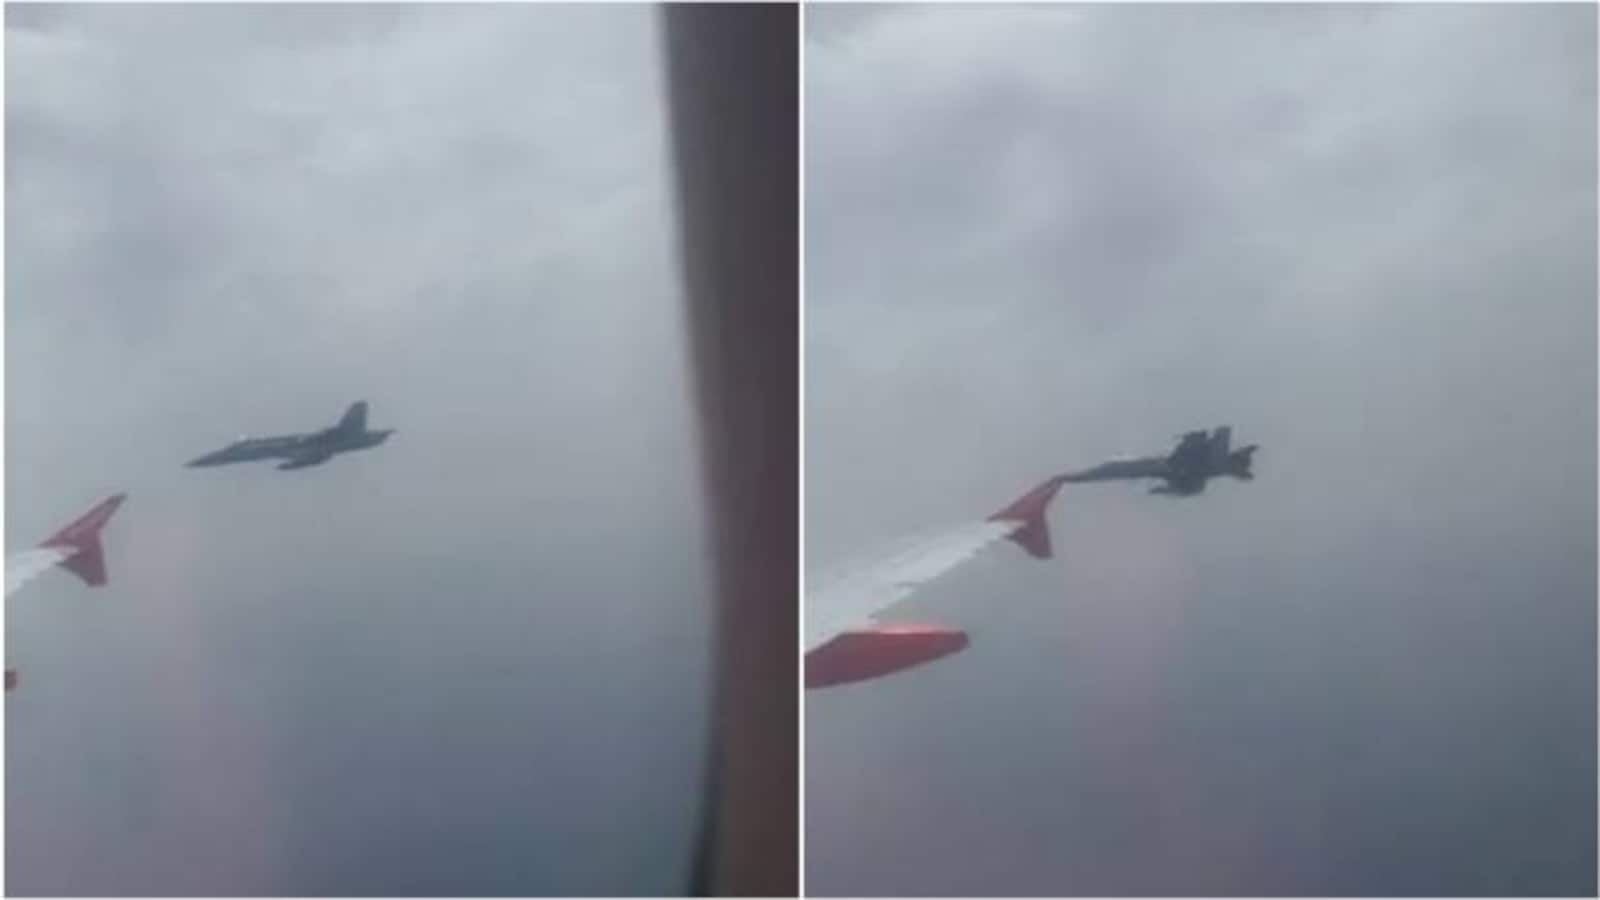 Watch: Easyjet Passenger Flight Escorted By Fighter Jet After Bomb Threat